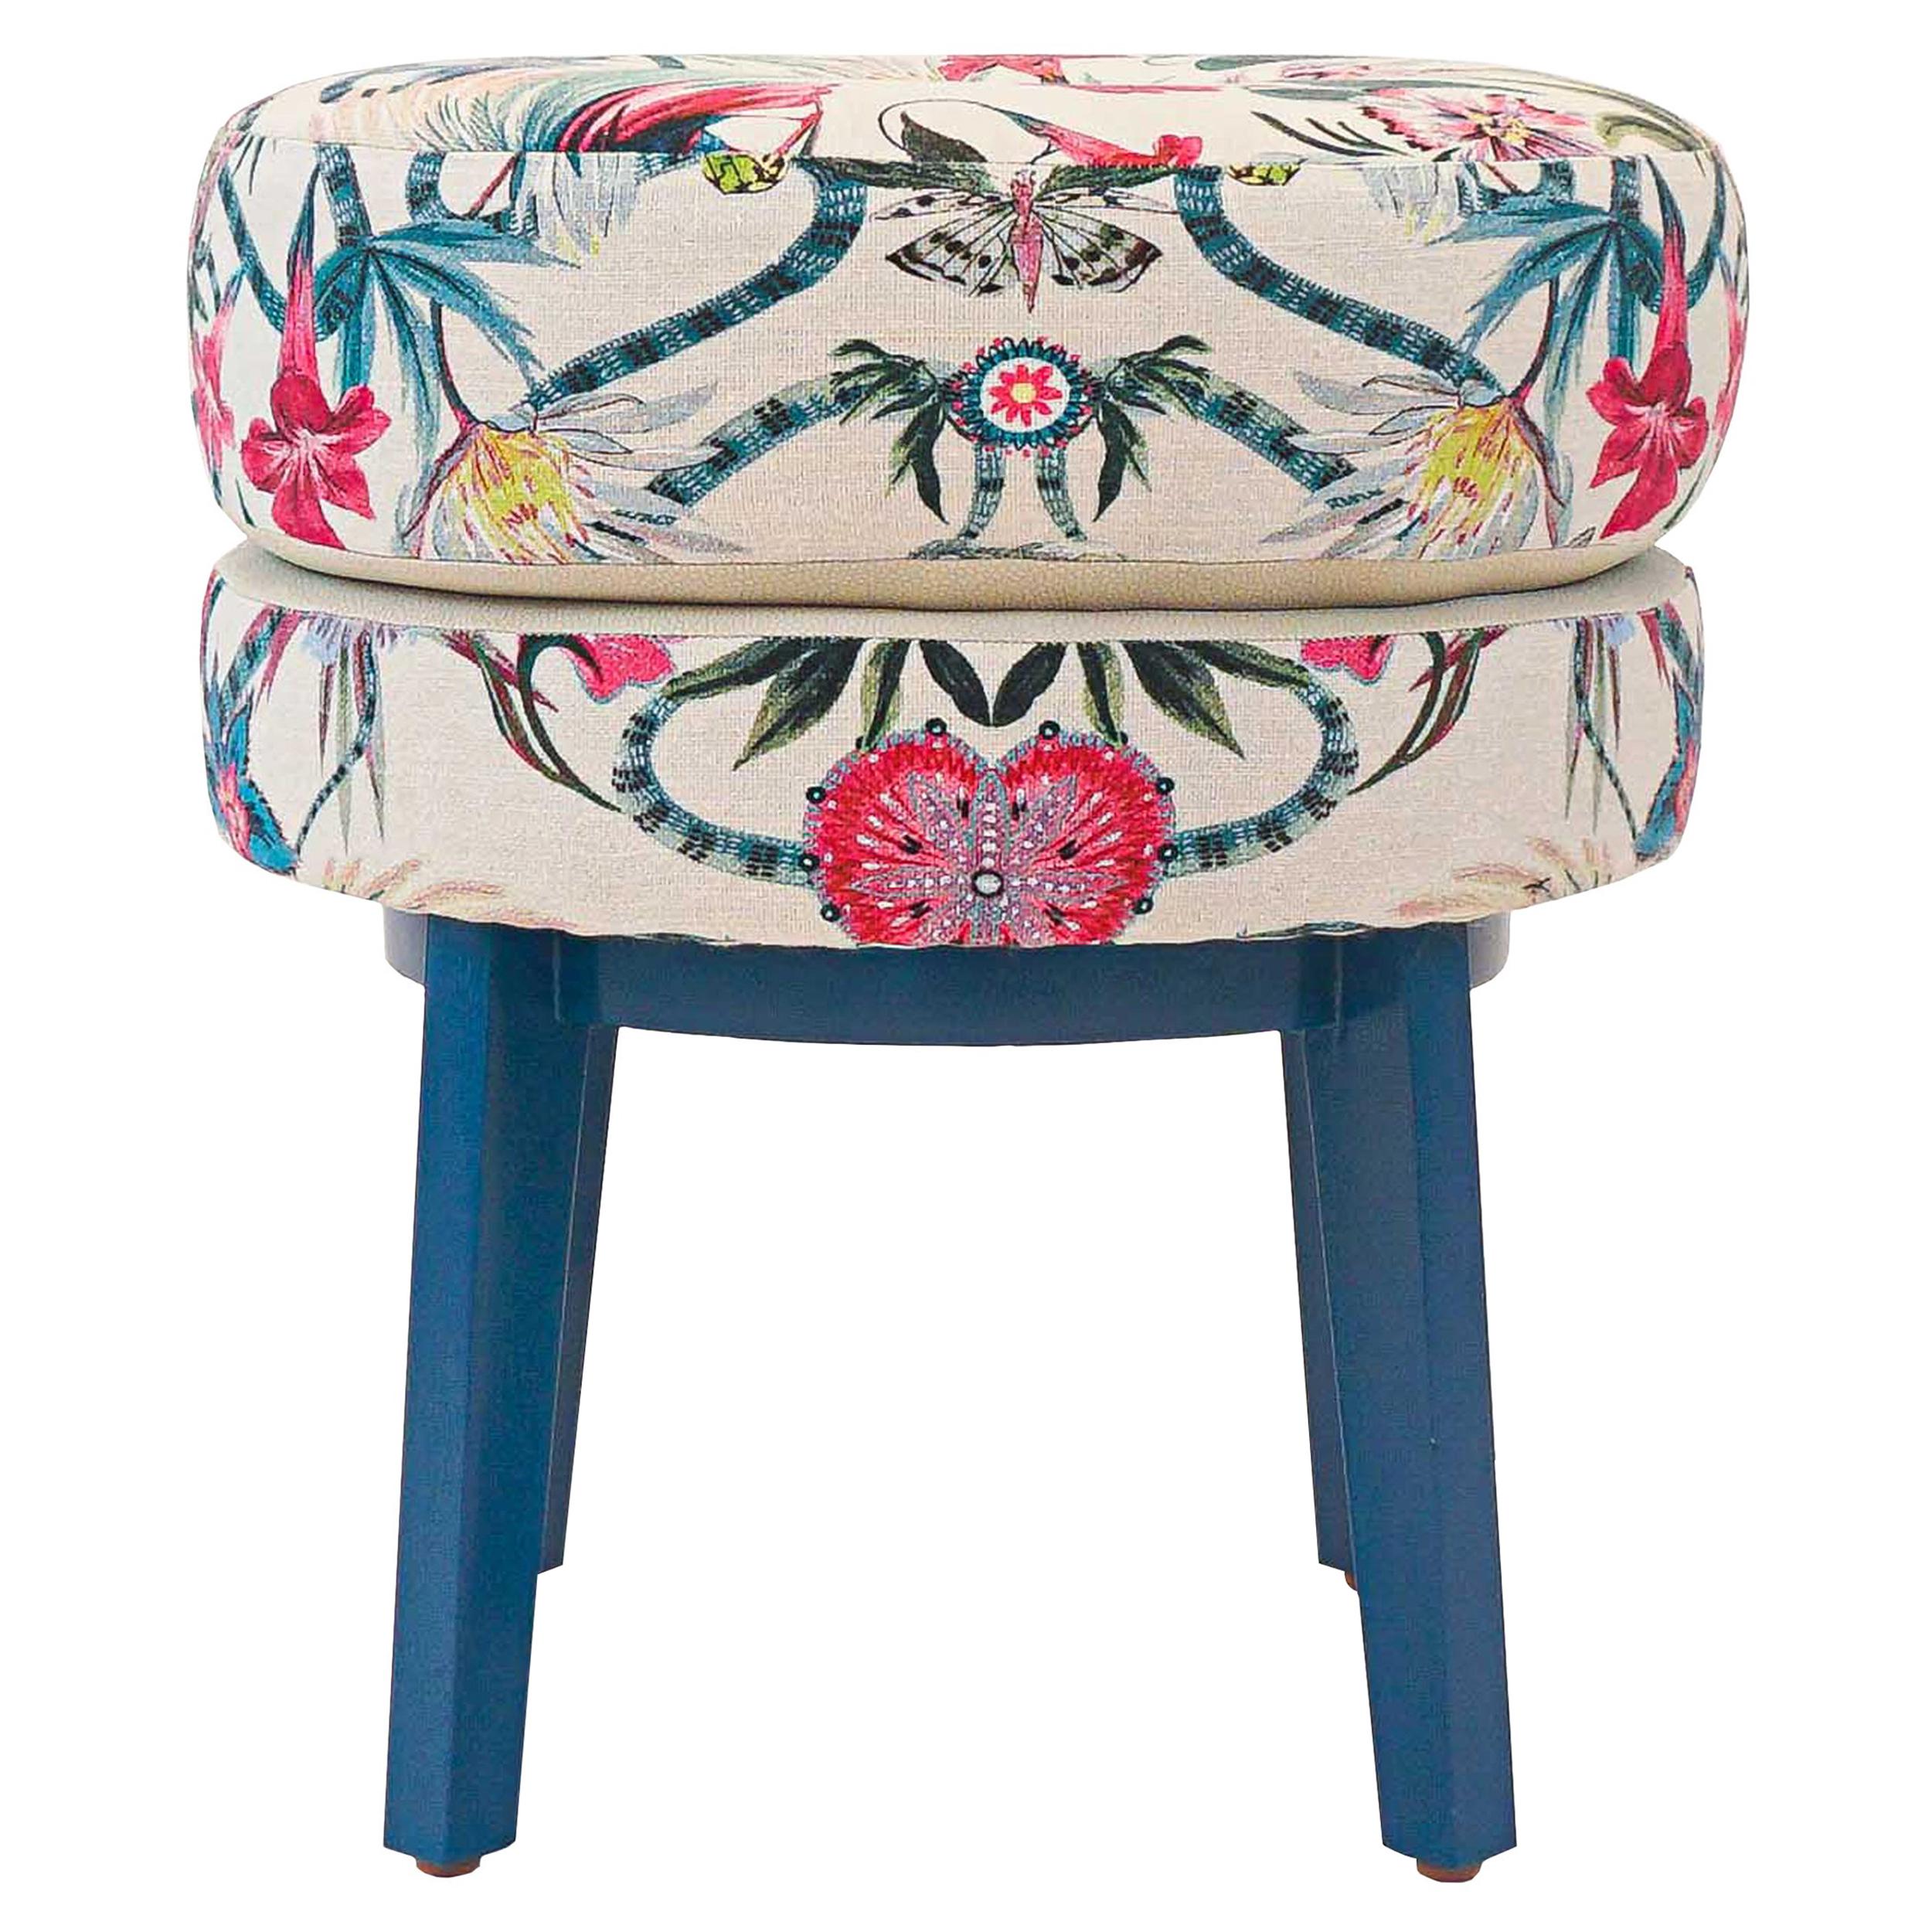 Floral Print Small Round Stool